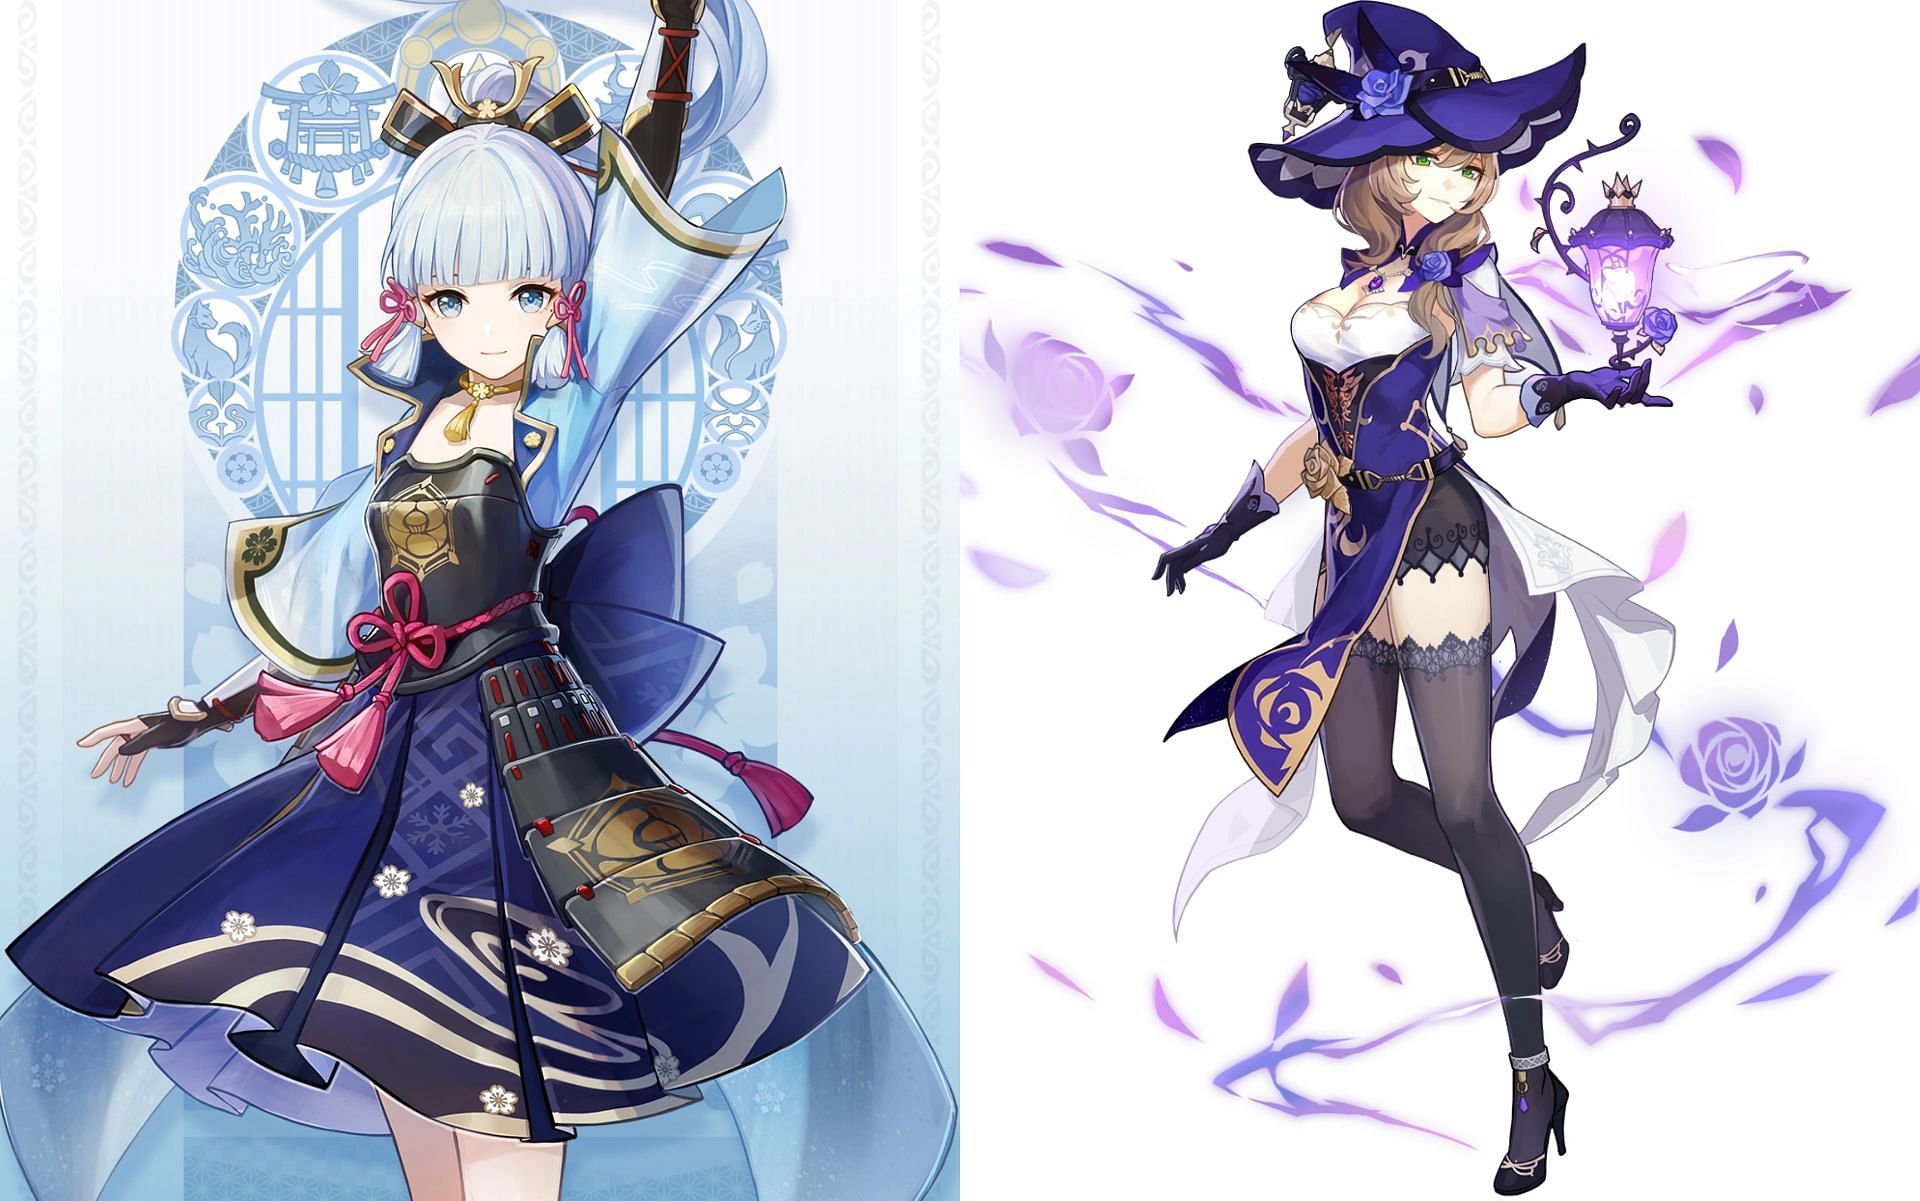 Ayaka and Lisa skins revealed by leakers set for update 3.4 release (Image via HoYoverse)